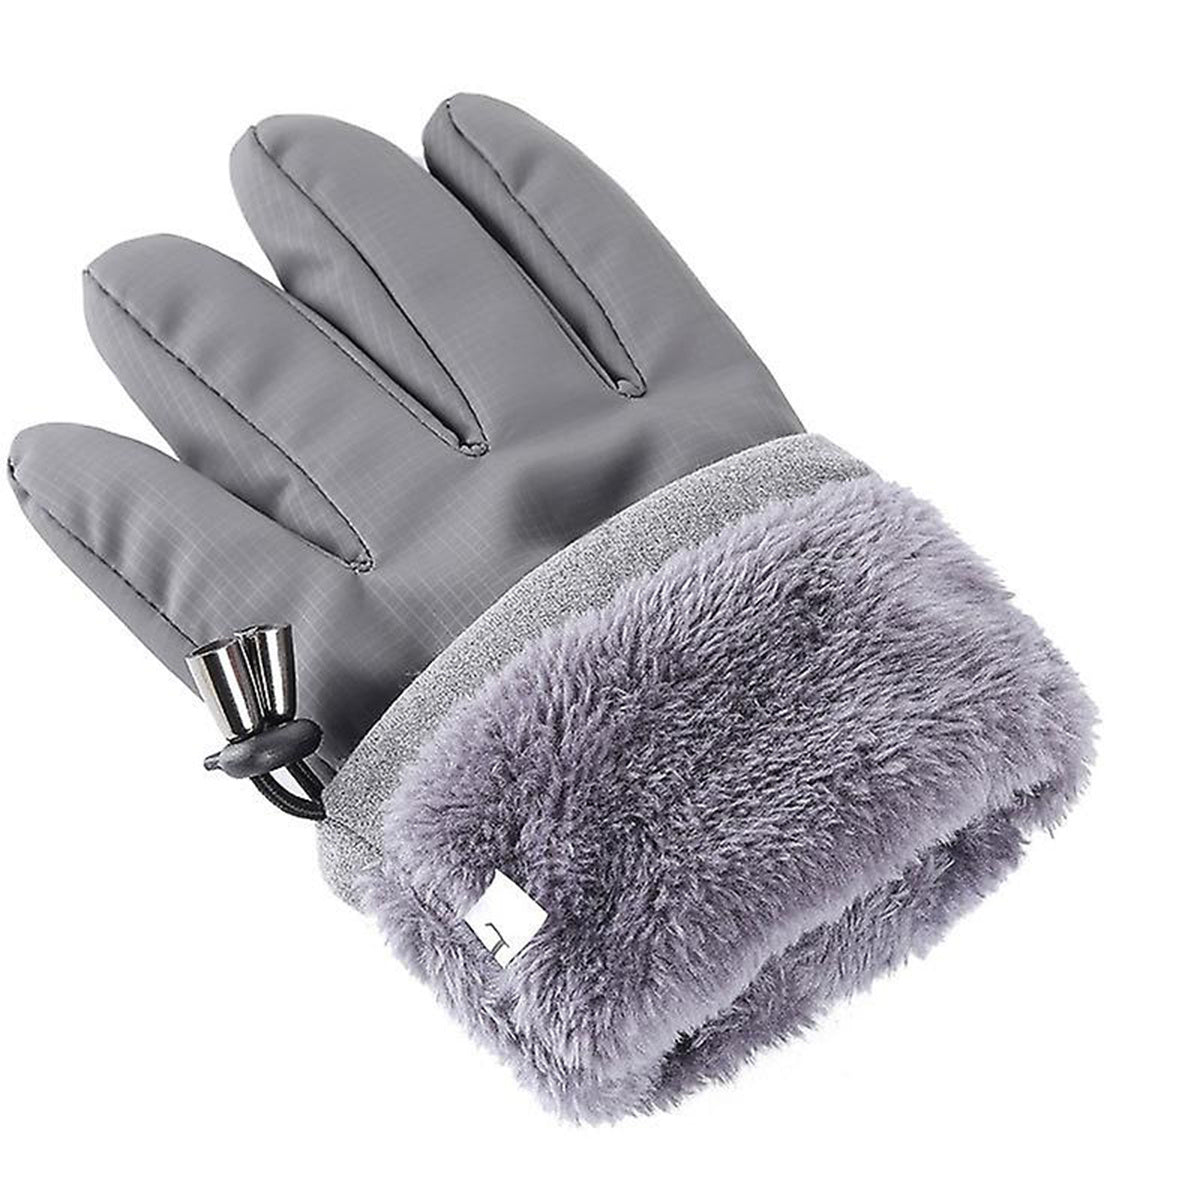 Men's Autumn And Winter Thickened Outdoor Sports Skiing Cycling Touch Screen Gloves